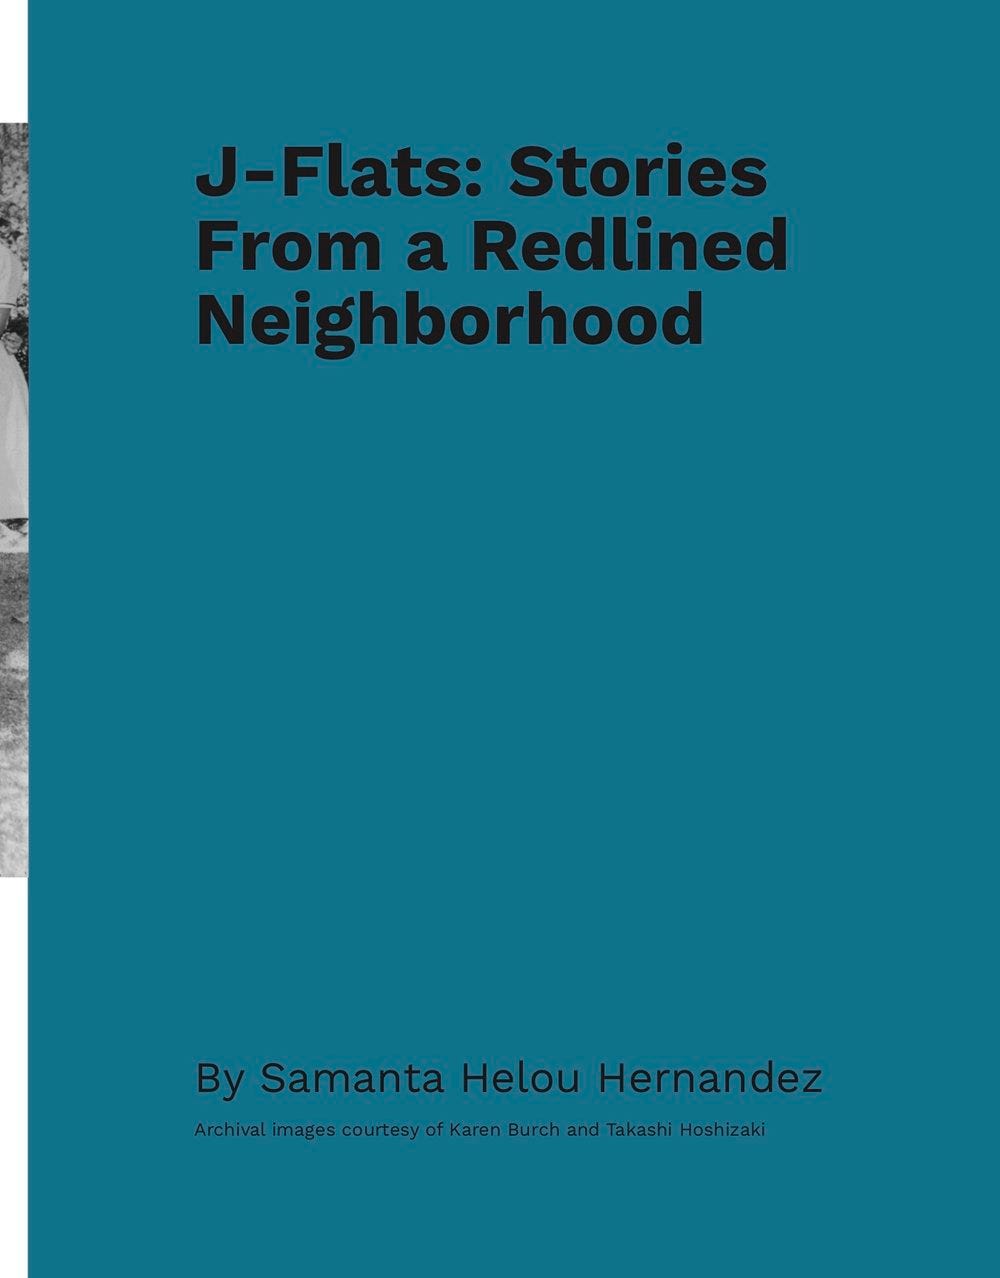 Excerpt from the magazine: a title page that says “J-Flats: Stories from a Redlined Neighborhood by Samanta Helou Hernandez. Archival images courtesy of Karen Burch and Takashi Hoshizaki”